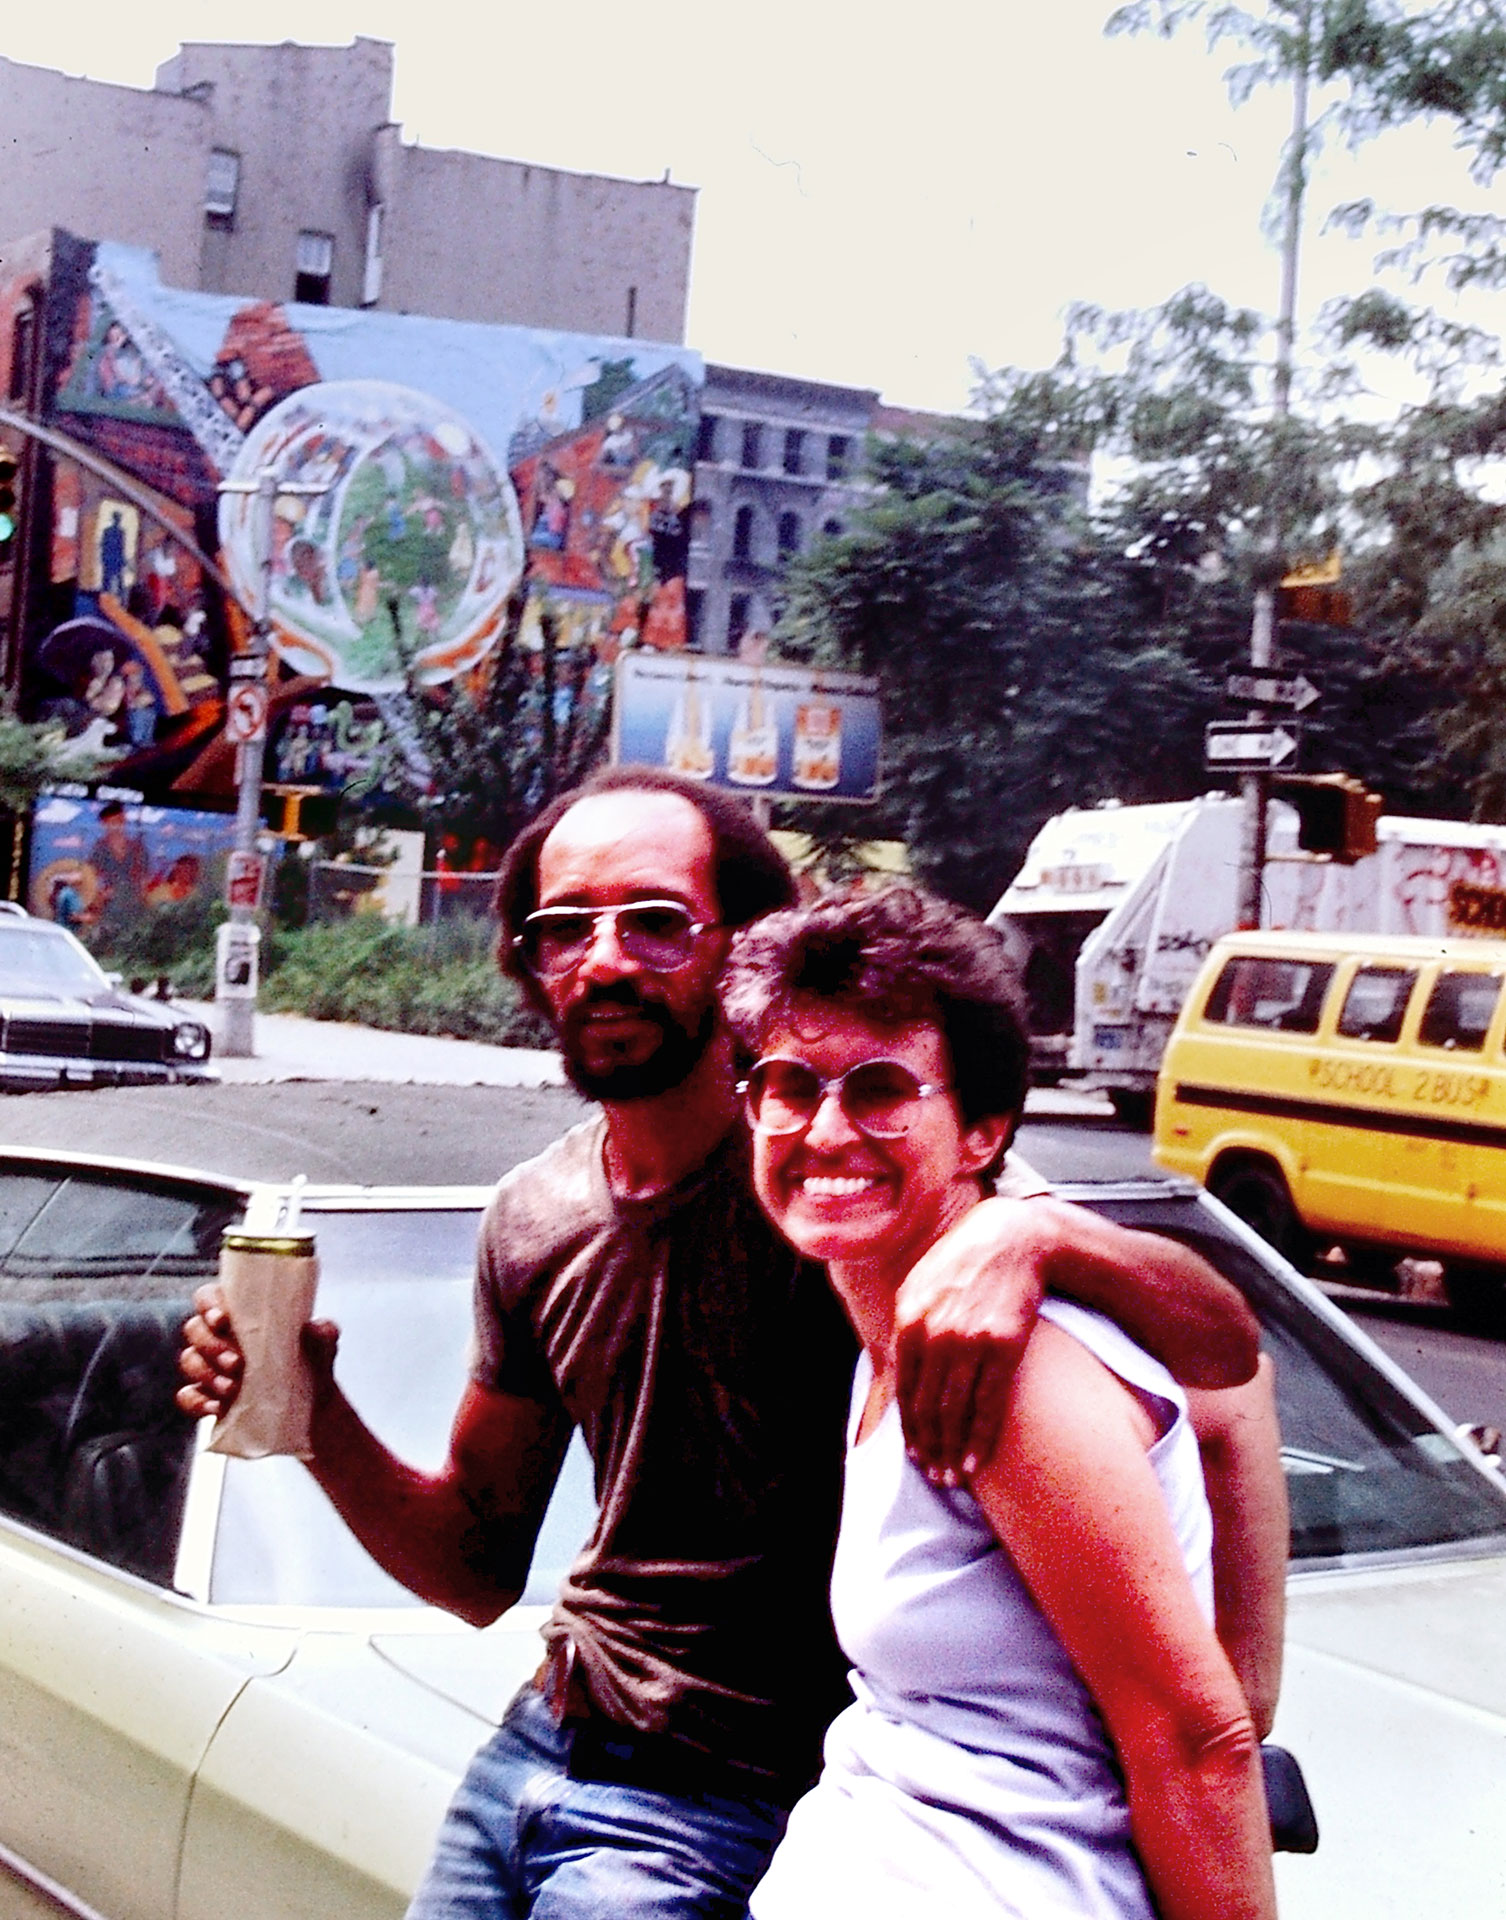   Joe Stephenson and Eva Cockcroft relaxing on NE corner of Avenue C and East 9th Street   Photo © Camille Perrottet  